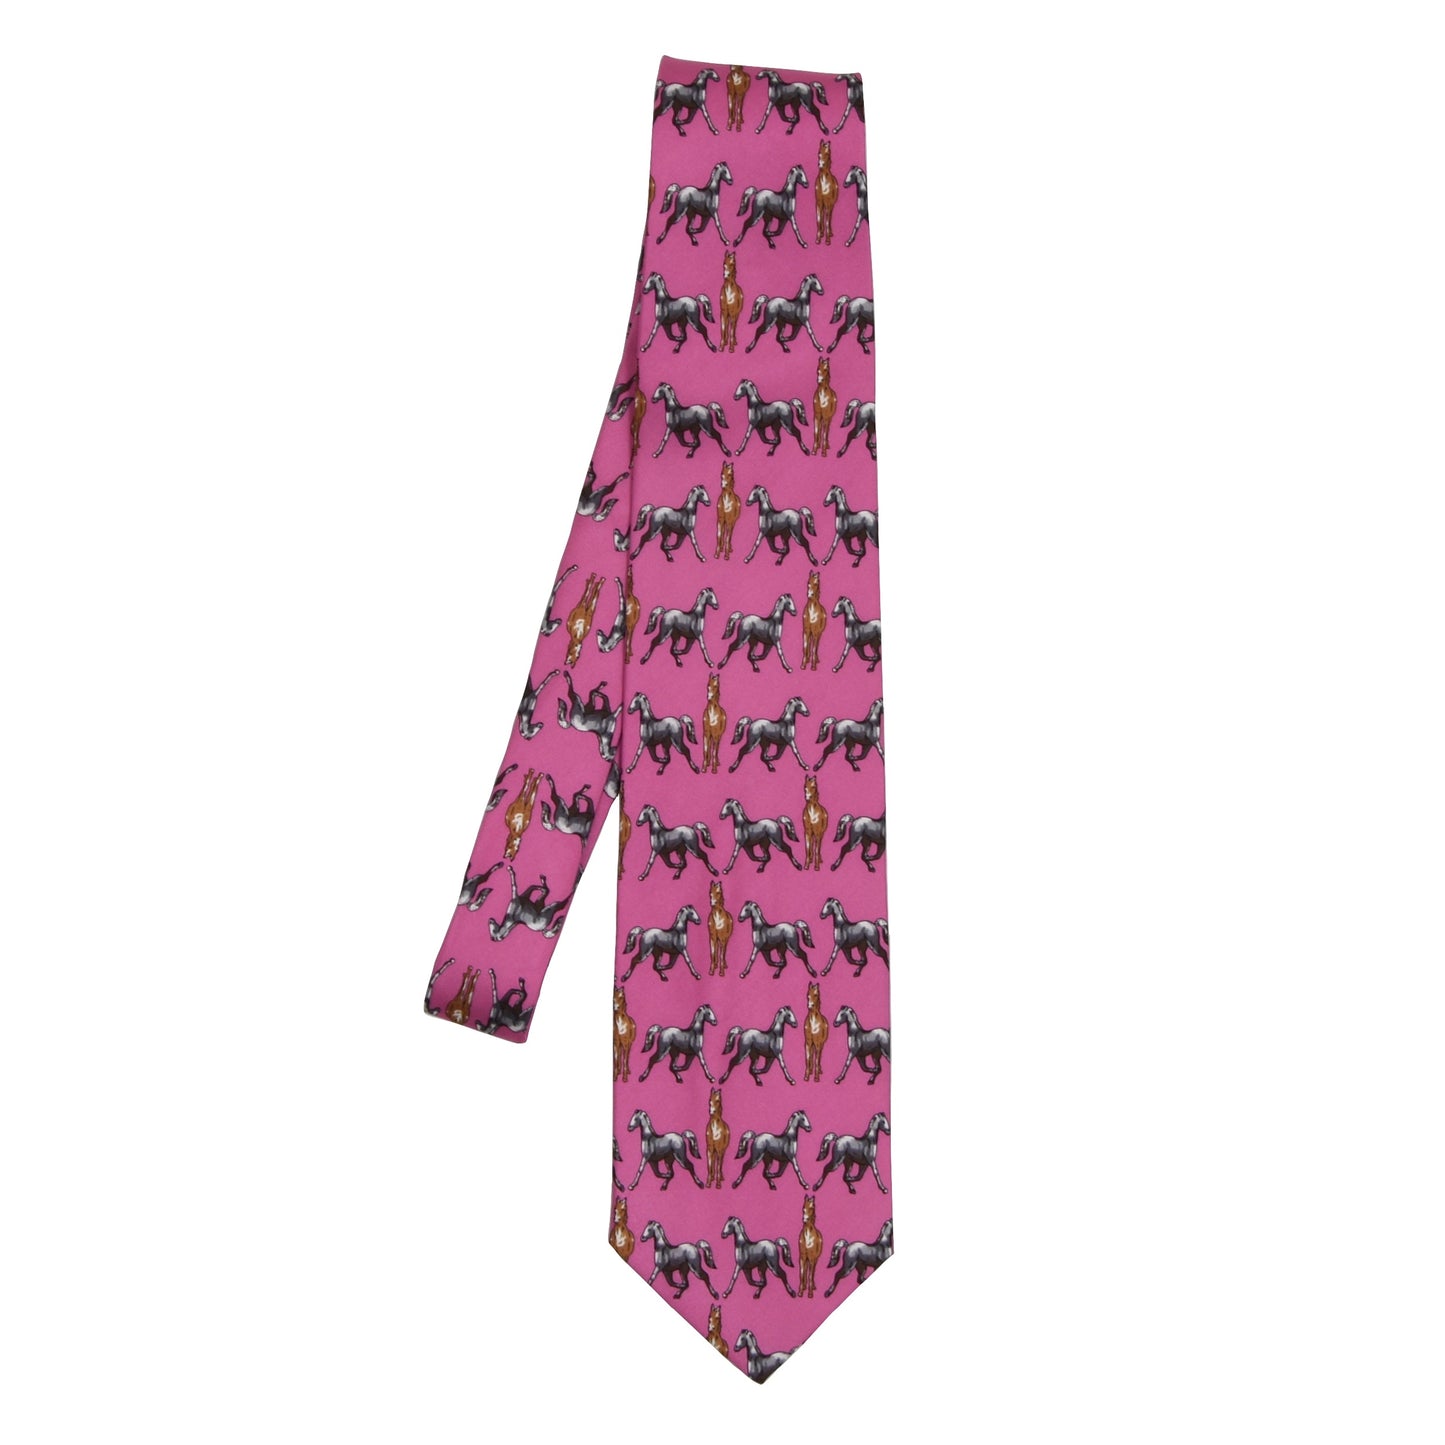 Horse Themed Printed Silk Tie - Pink